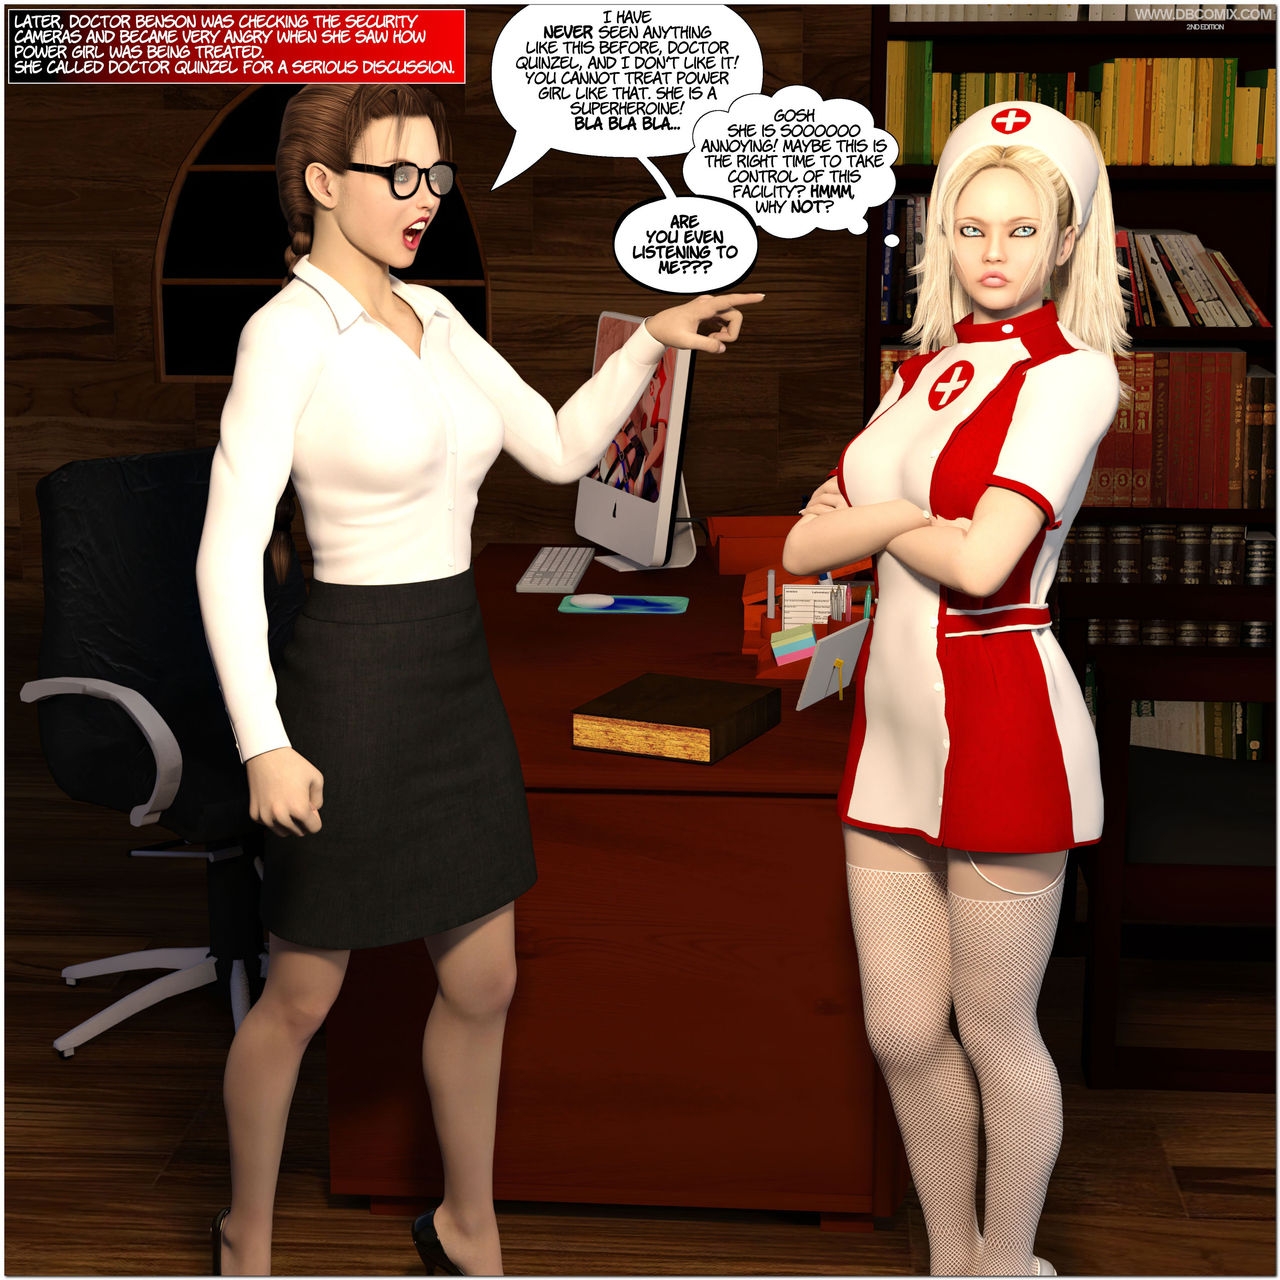 [DBComix] New Arkham For Superheroines 1 2nd Edition - Humiliation and Degradation of Power Girl 62